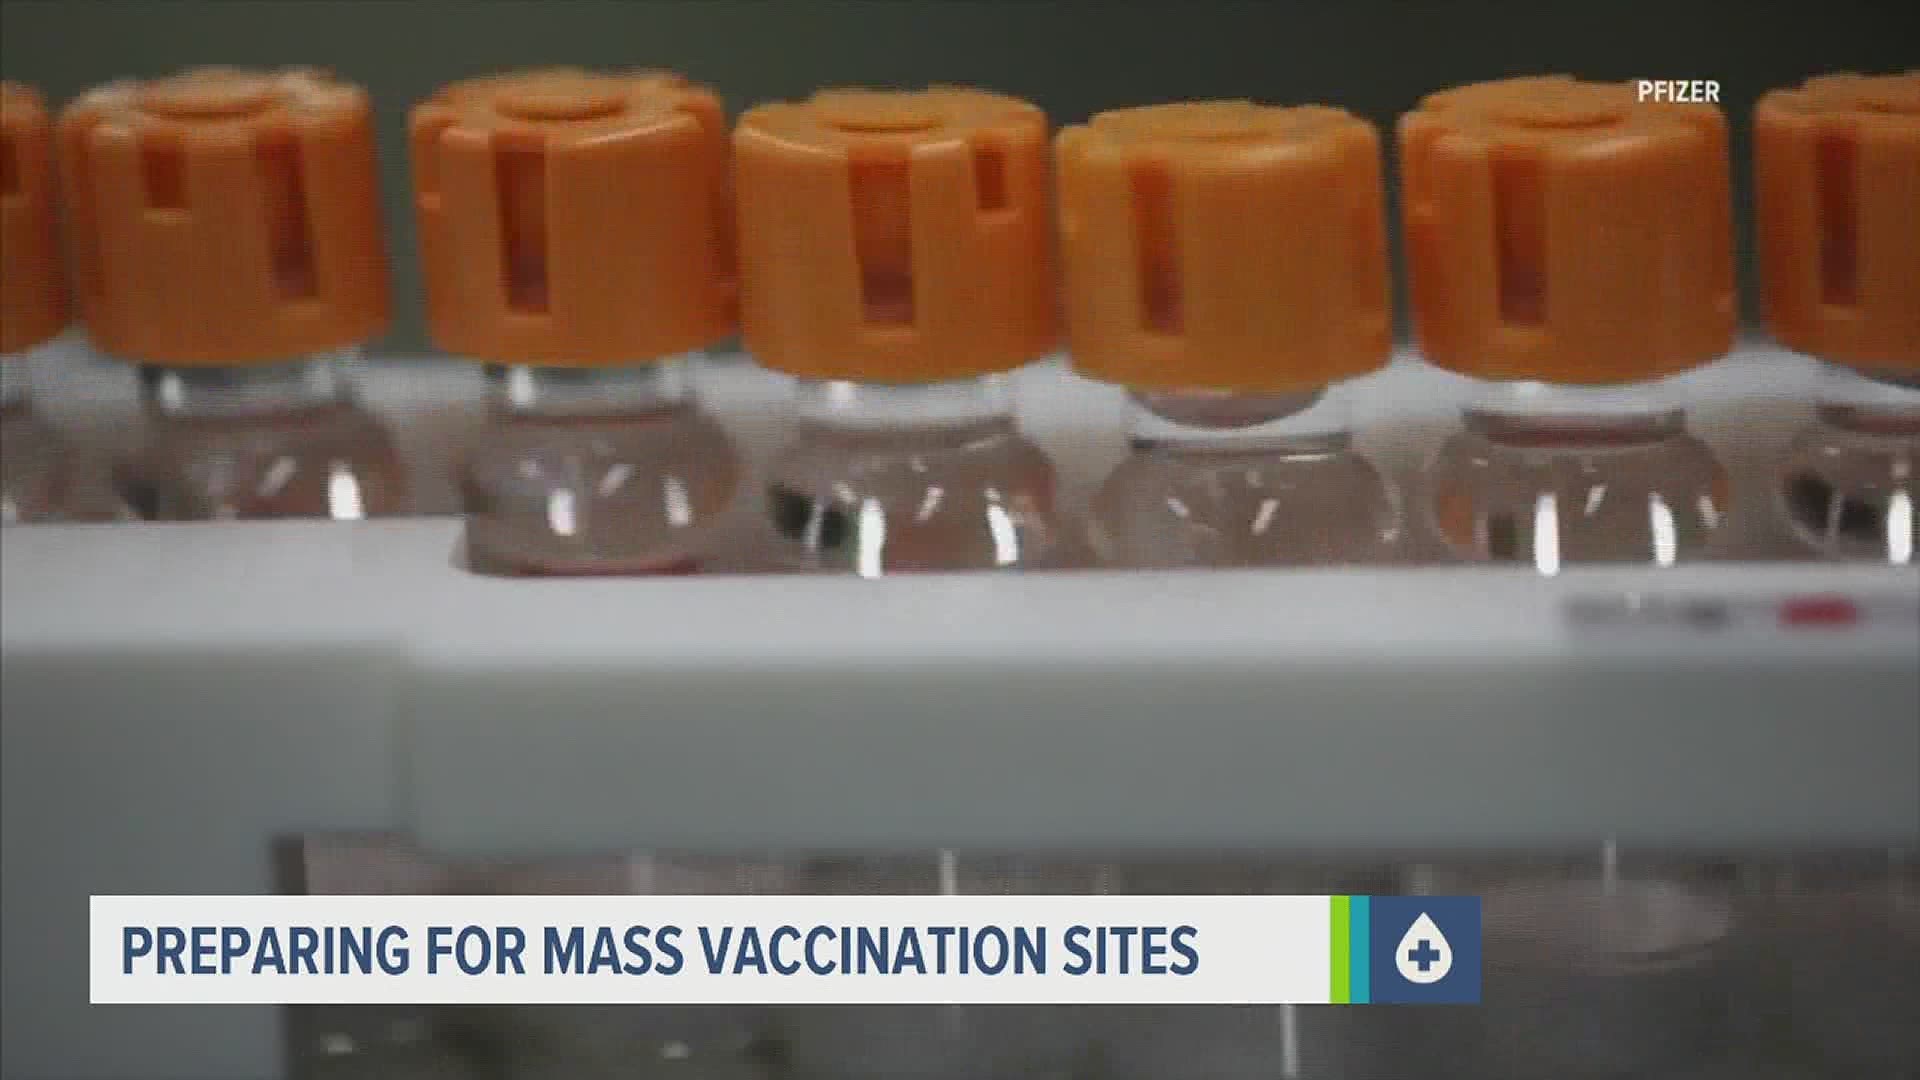 As Pennsylvania Department of Health officials work with community organizations to plan future mass vaccination clinics, they also warn not to expect them too soon.